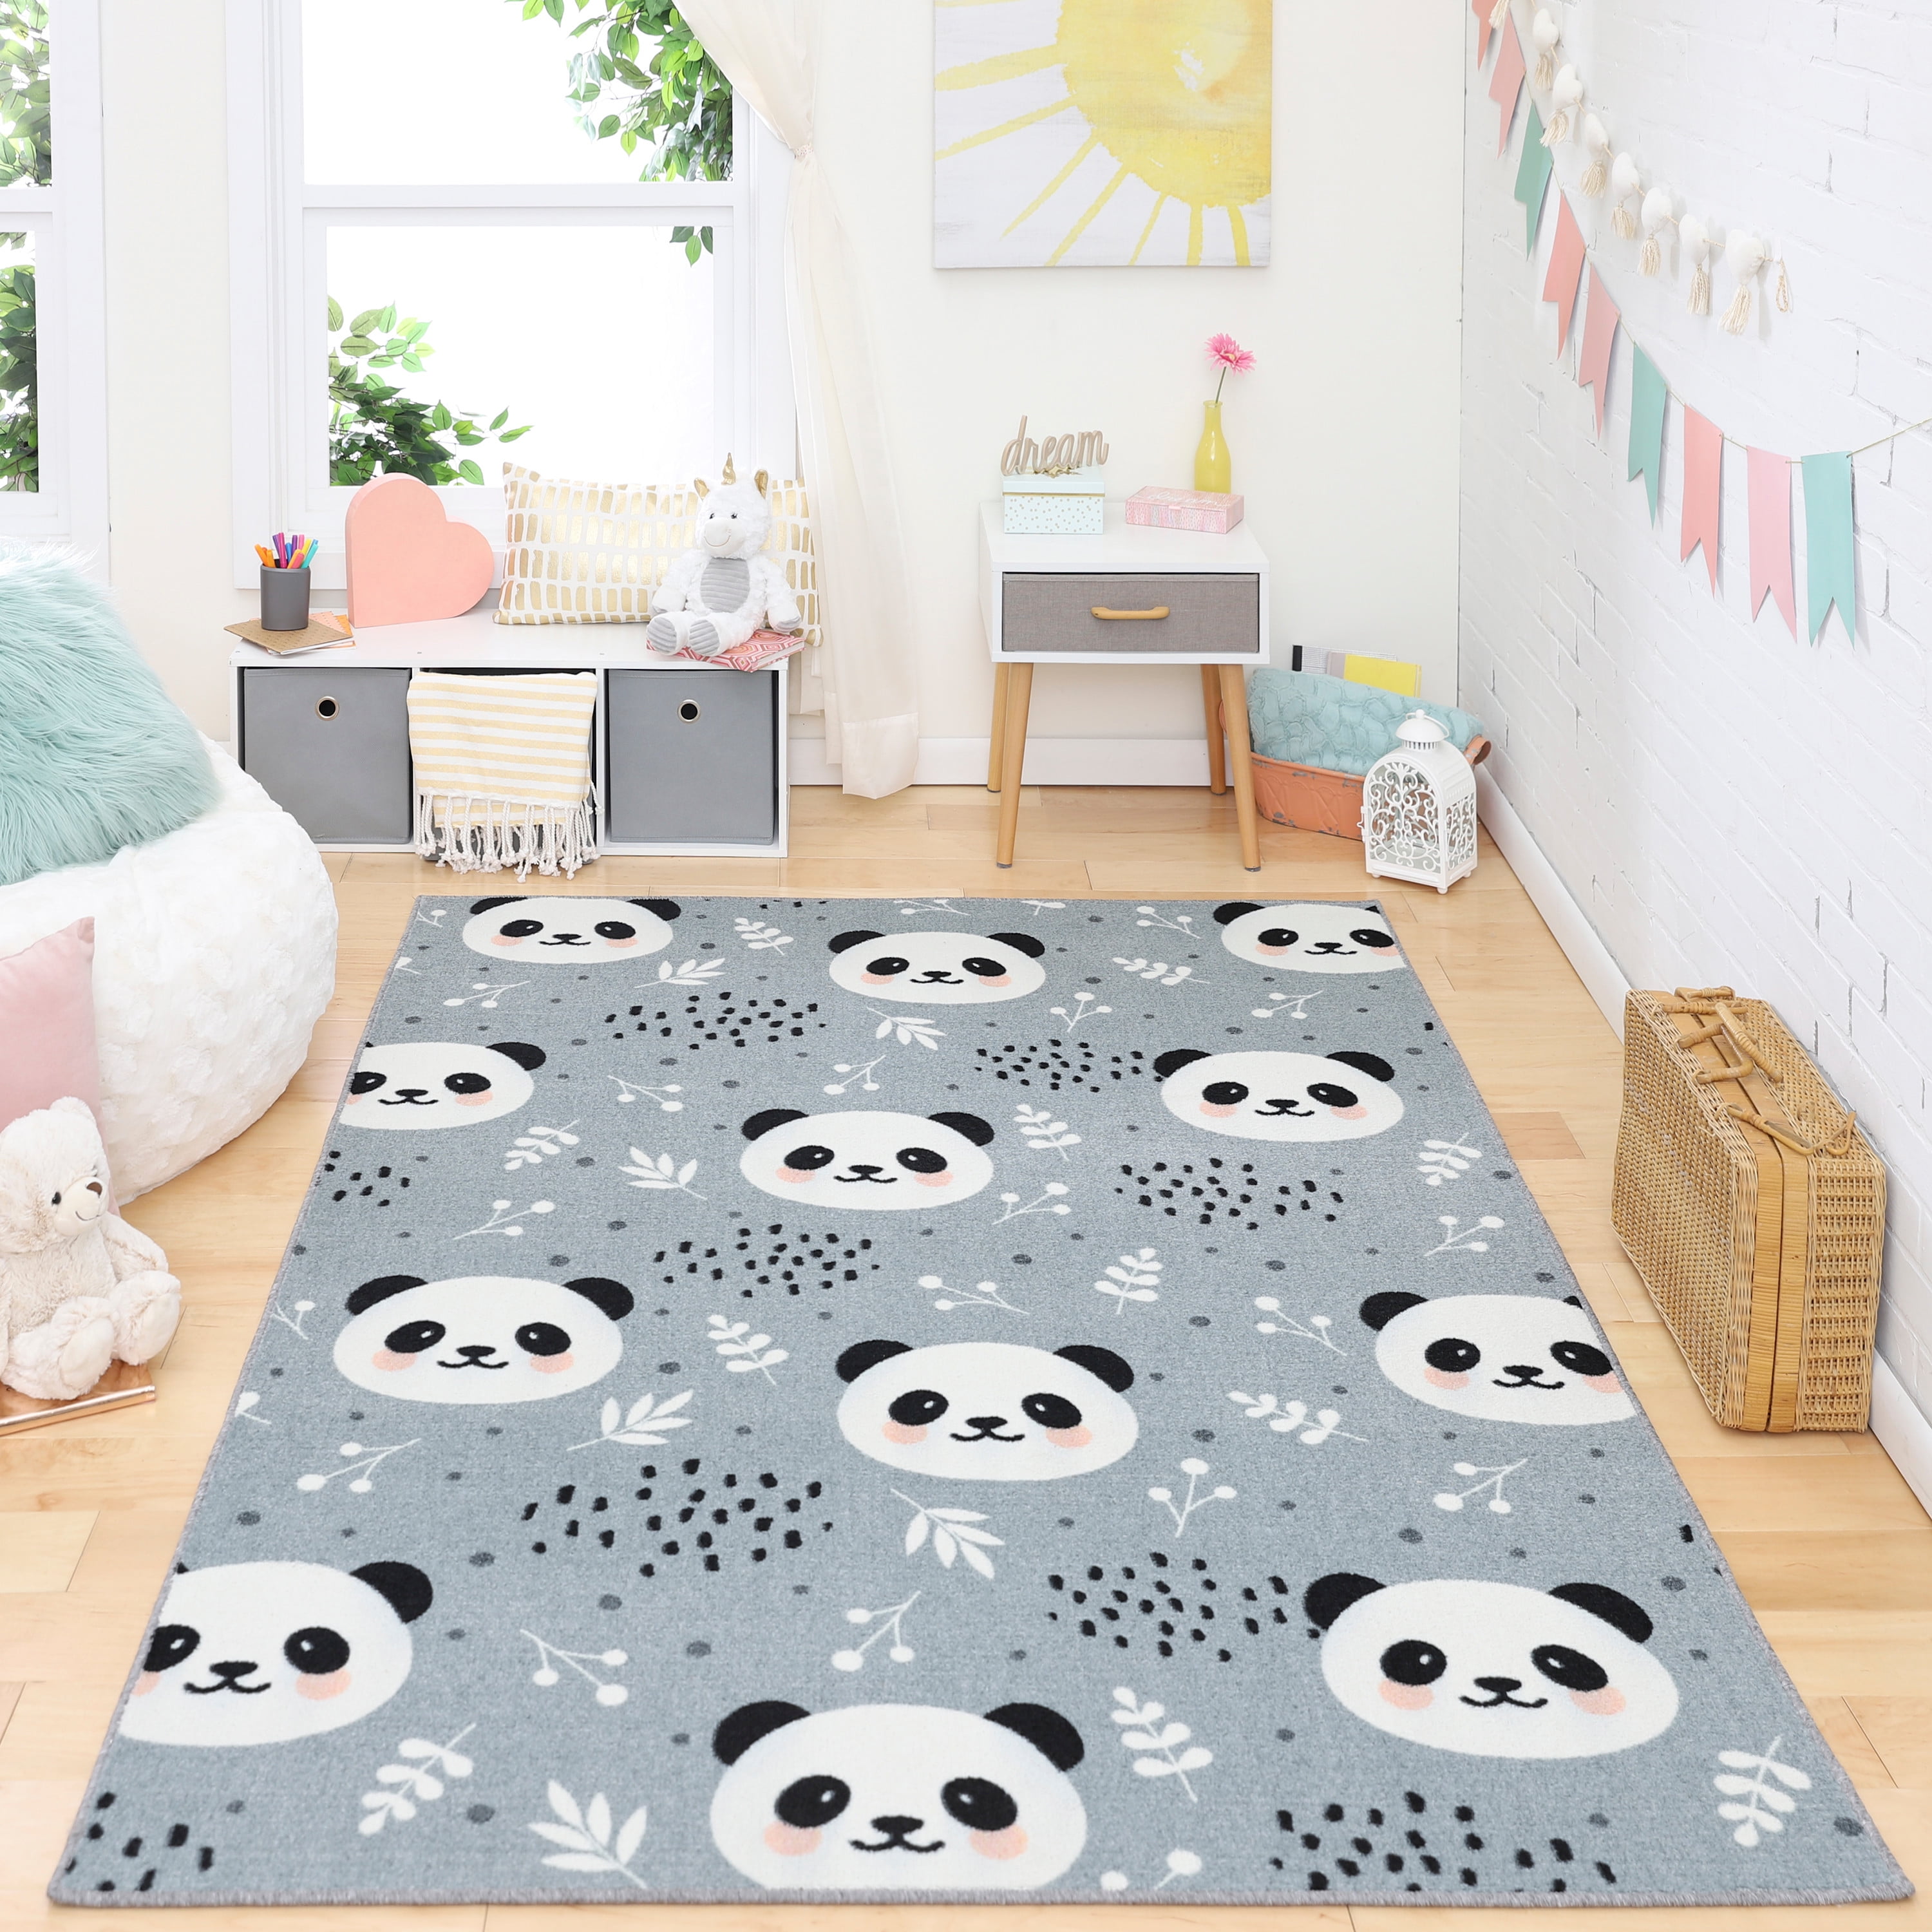 ALAZA Colored Panda Animal Area Rug Rugs Non-Slip Floor Mat Doormats Living Dining Room Bedroom Dorm 60 x 39 inches inches Home Decor 